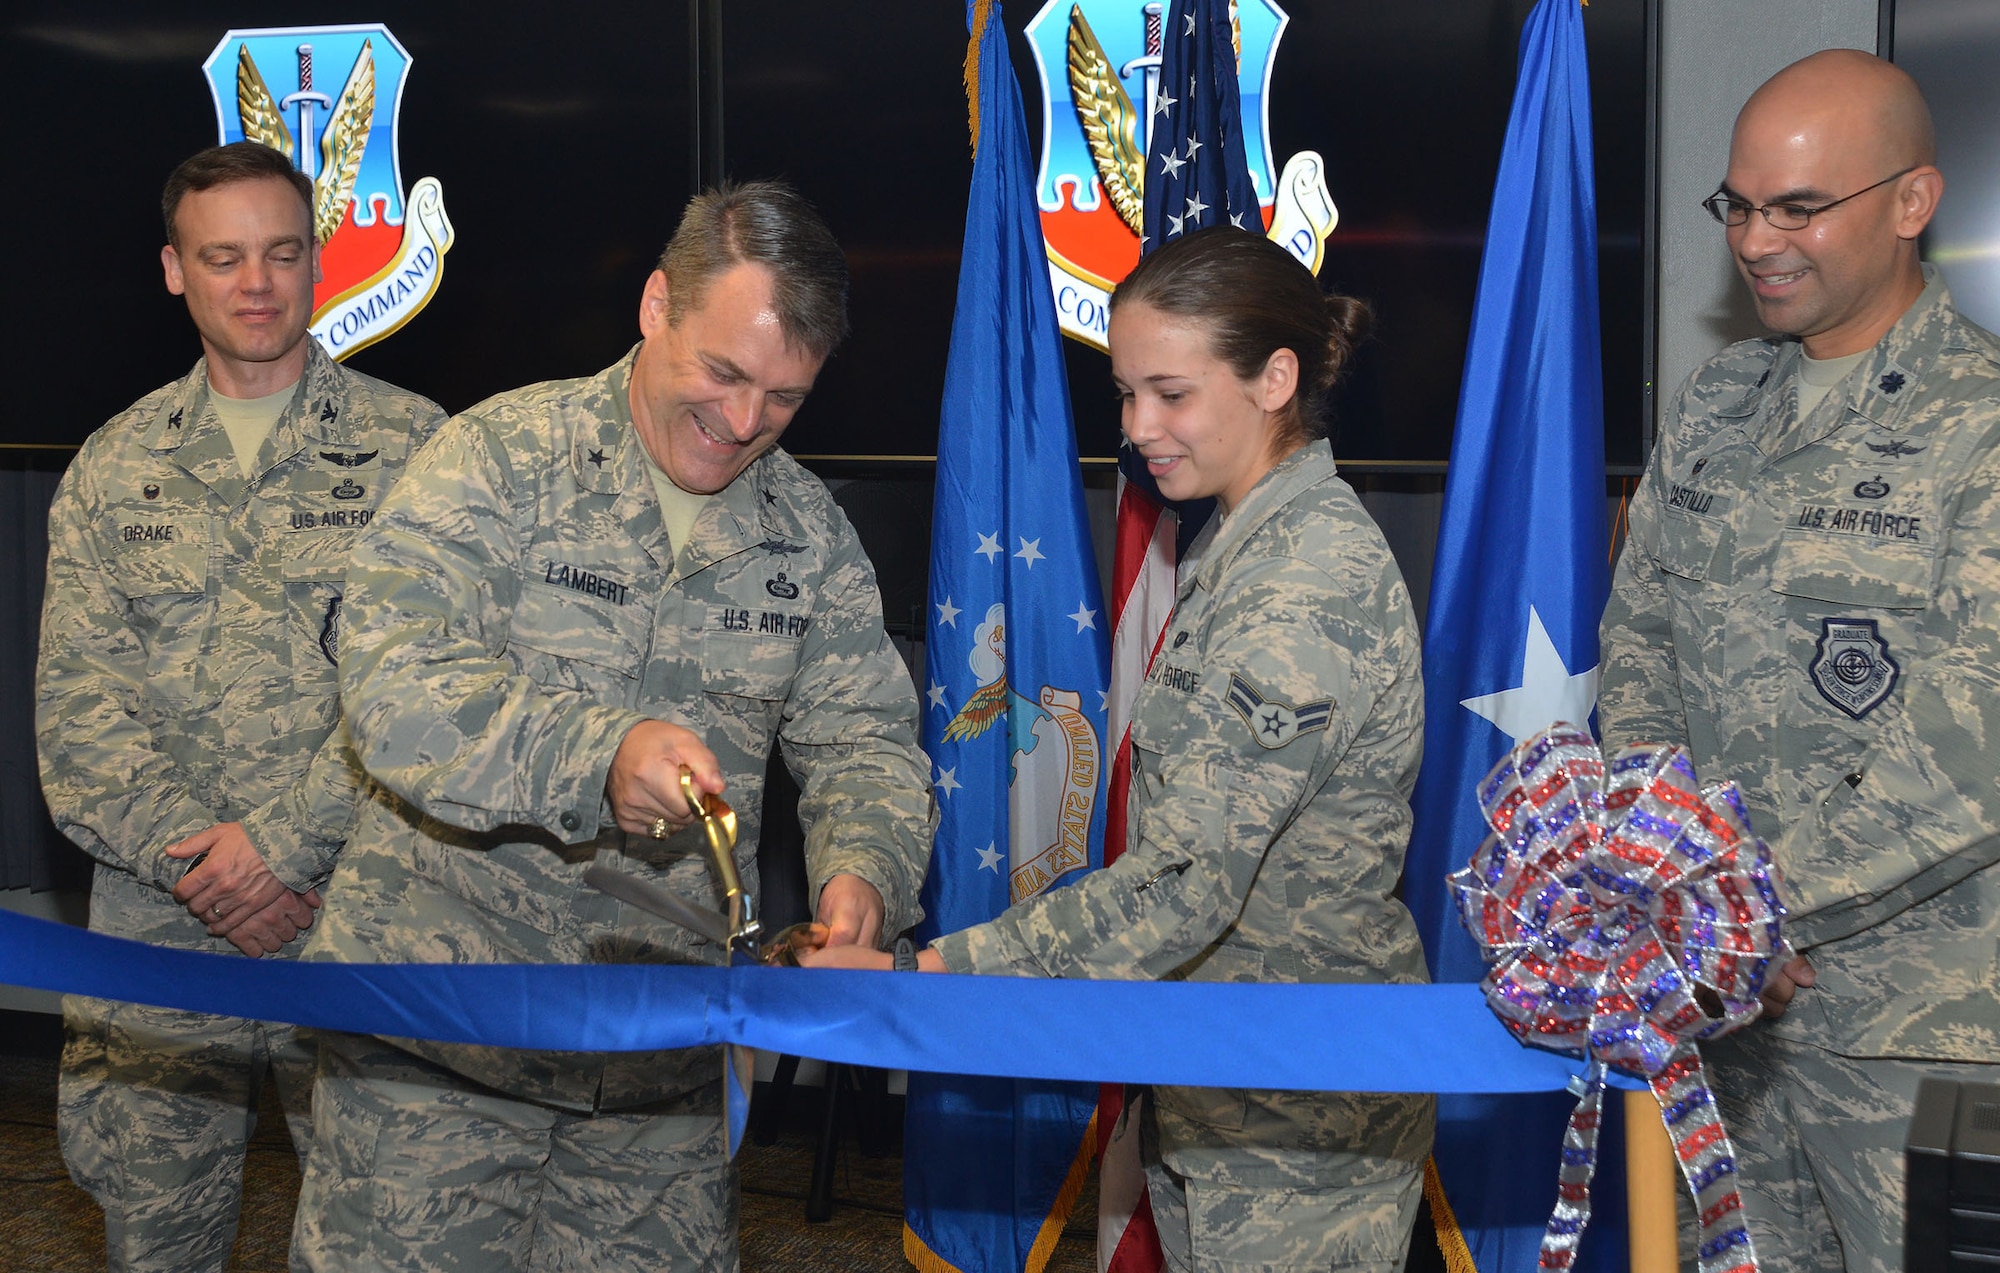 Brig. Gen. Peter Lambert, director of intelligence, Headquarters Air Combat Command, and Airman 1st Class Maggie, the youngest Airman assigned to the CTIC, 35th Intelligence Squadron, open the Cyberspace Threat Intelligence Center during the ribbon cutting ceremony Apr. 10. (U.S. Air Force photo by Lori Bultman)